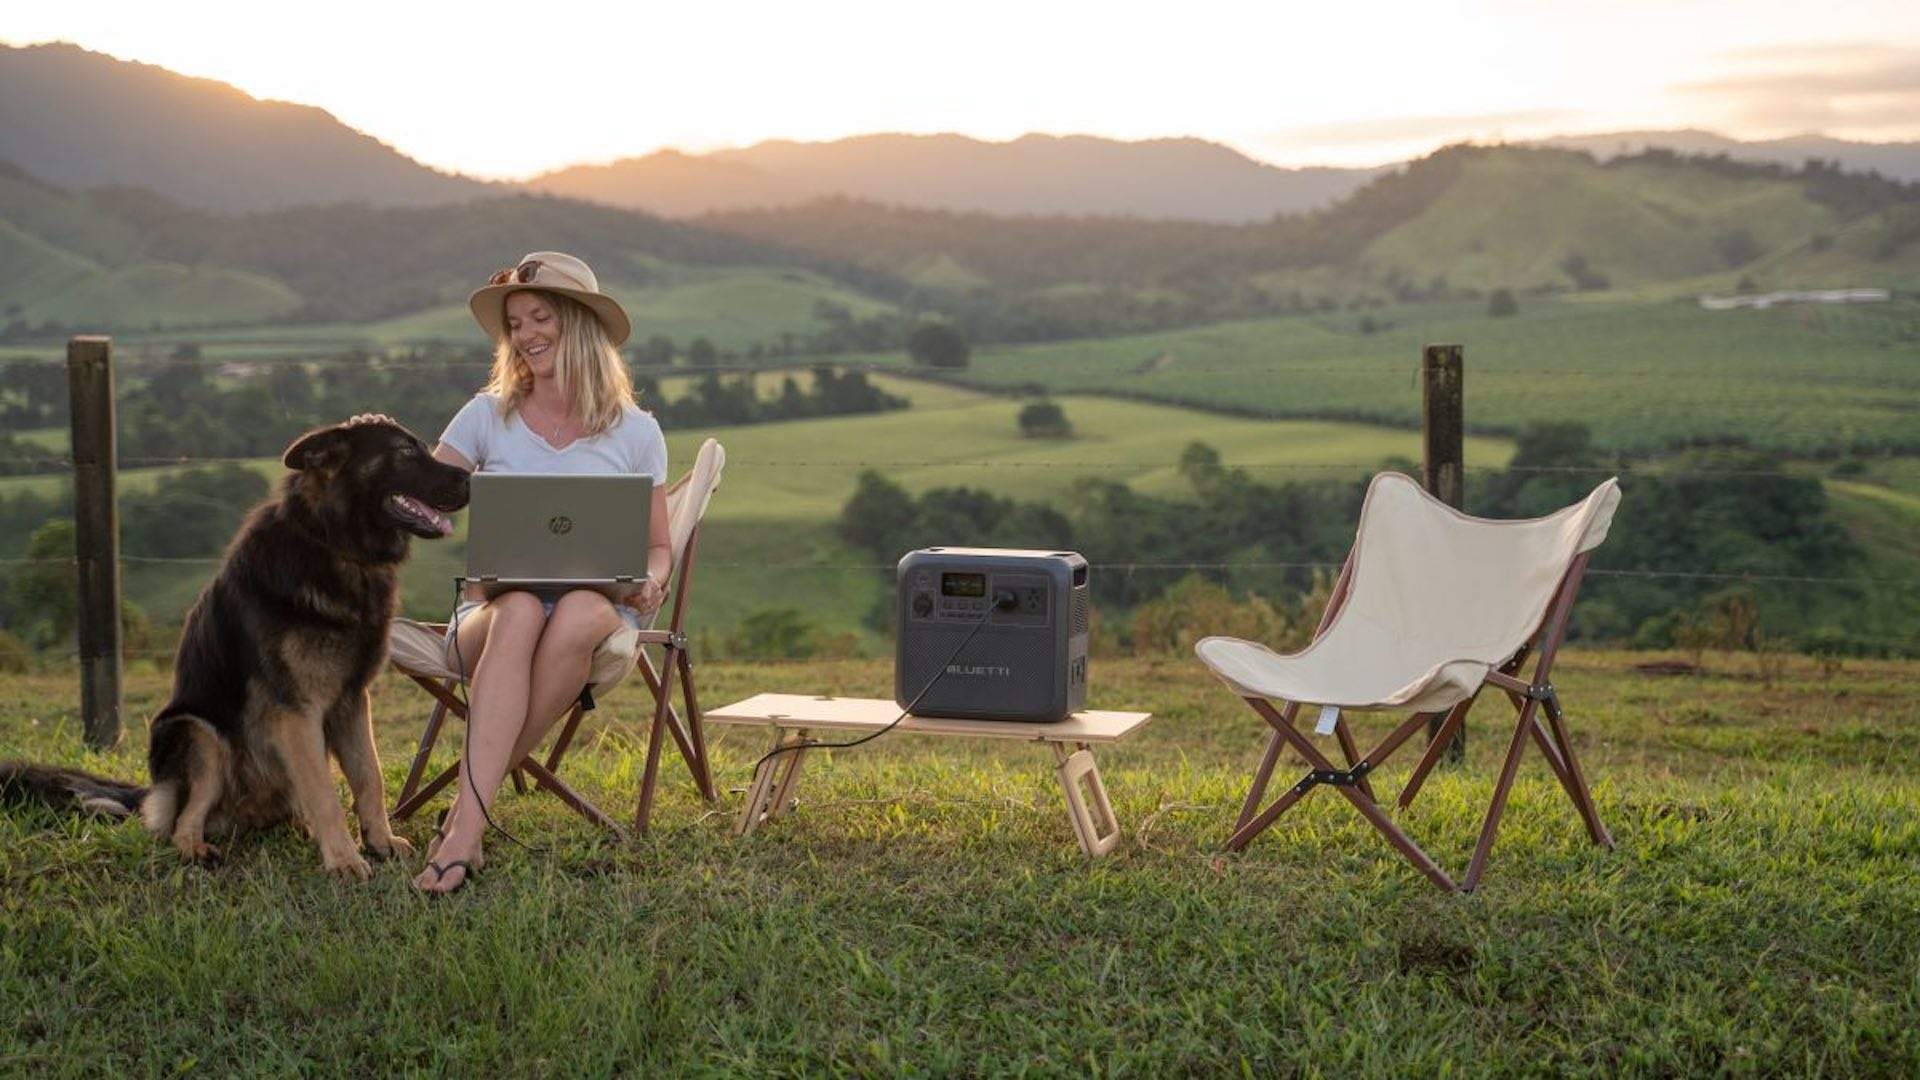 A Cutting-Edge Portable Power Generator is Hitting Shelves in Australia With a Limited-Time Launch Price